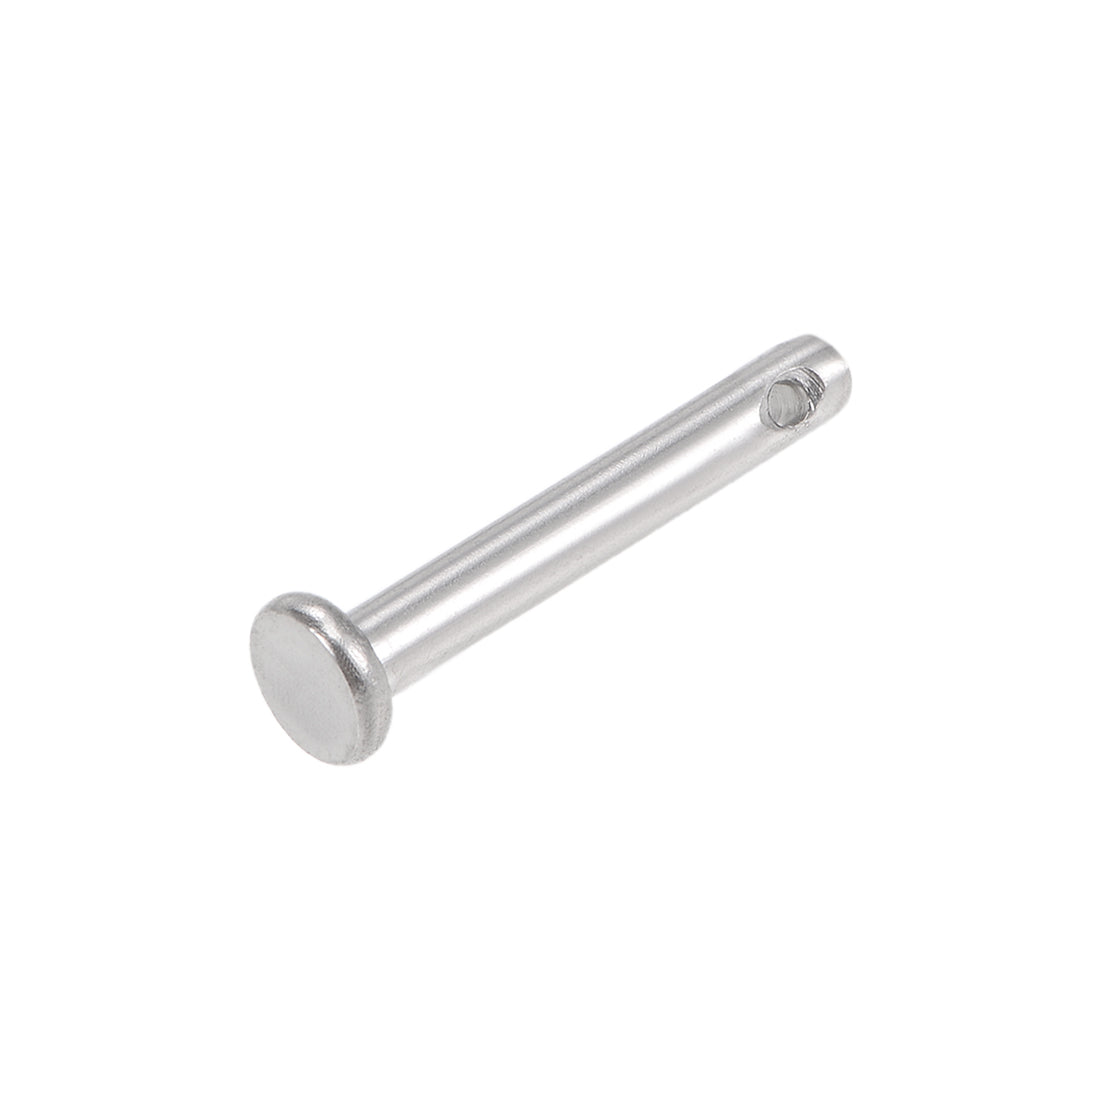 Uxcell Uxcell Single Hole Clevis Pins - 10mm x 60mm Flat Head 304 Stainless Steel Link Hinge Pin 4Pcs